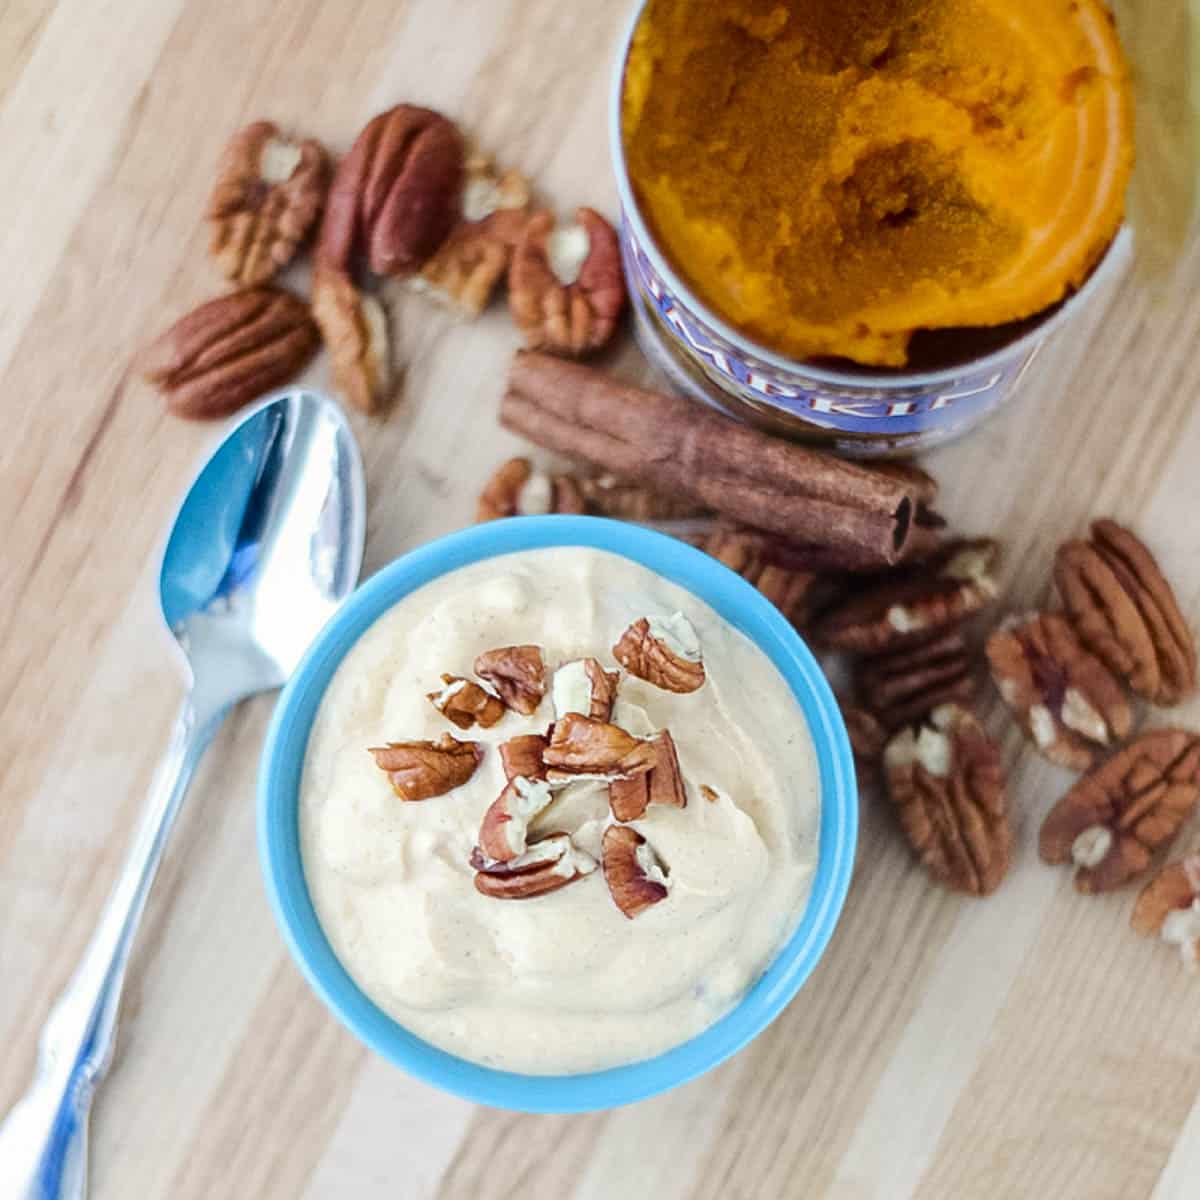 silver spoon, blue bowl of pumpkin yogurt topped with pecans on a wooden counter surrounded by pecans, cinnamon stick, and open can of pumpkin puree